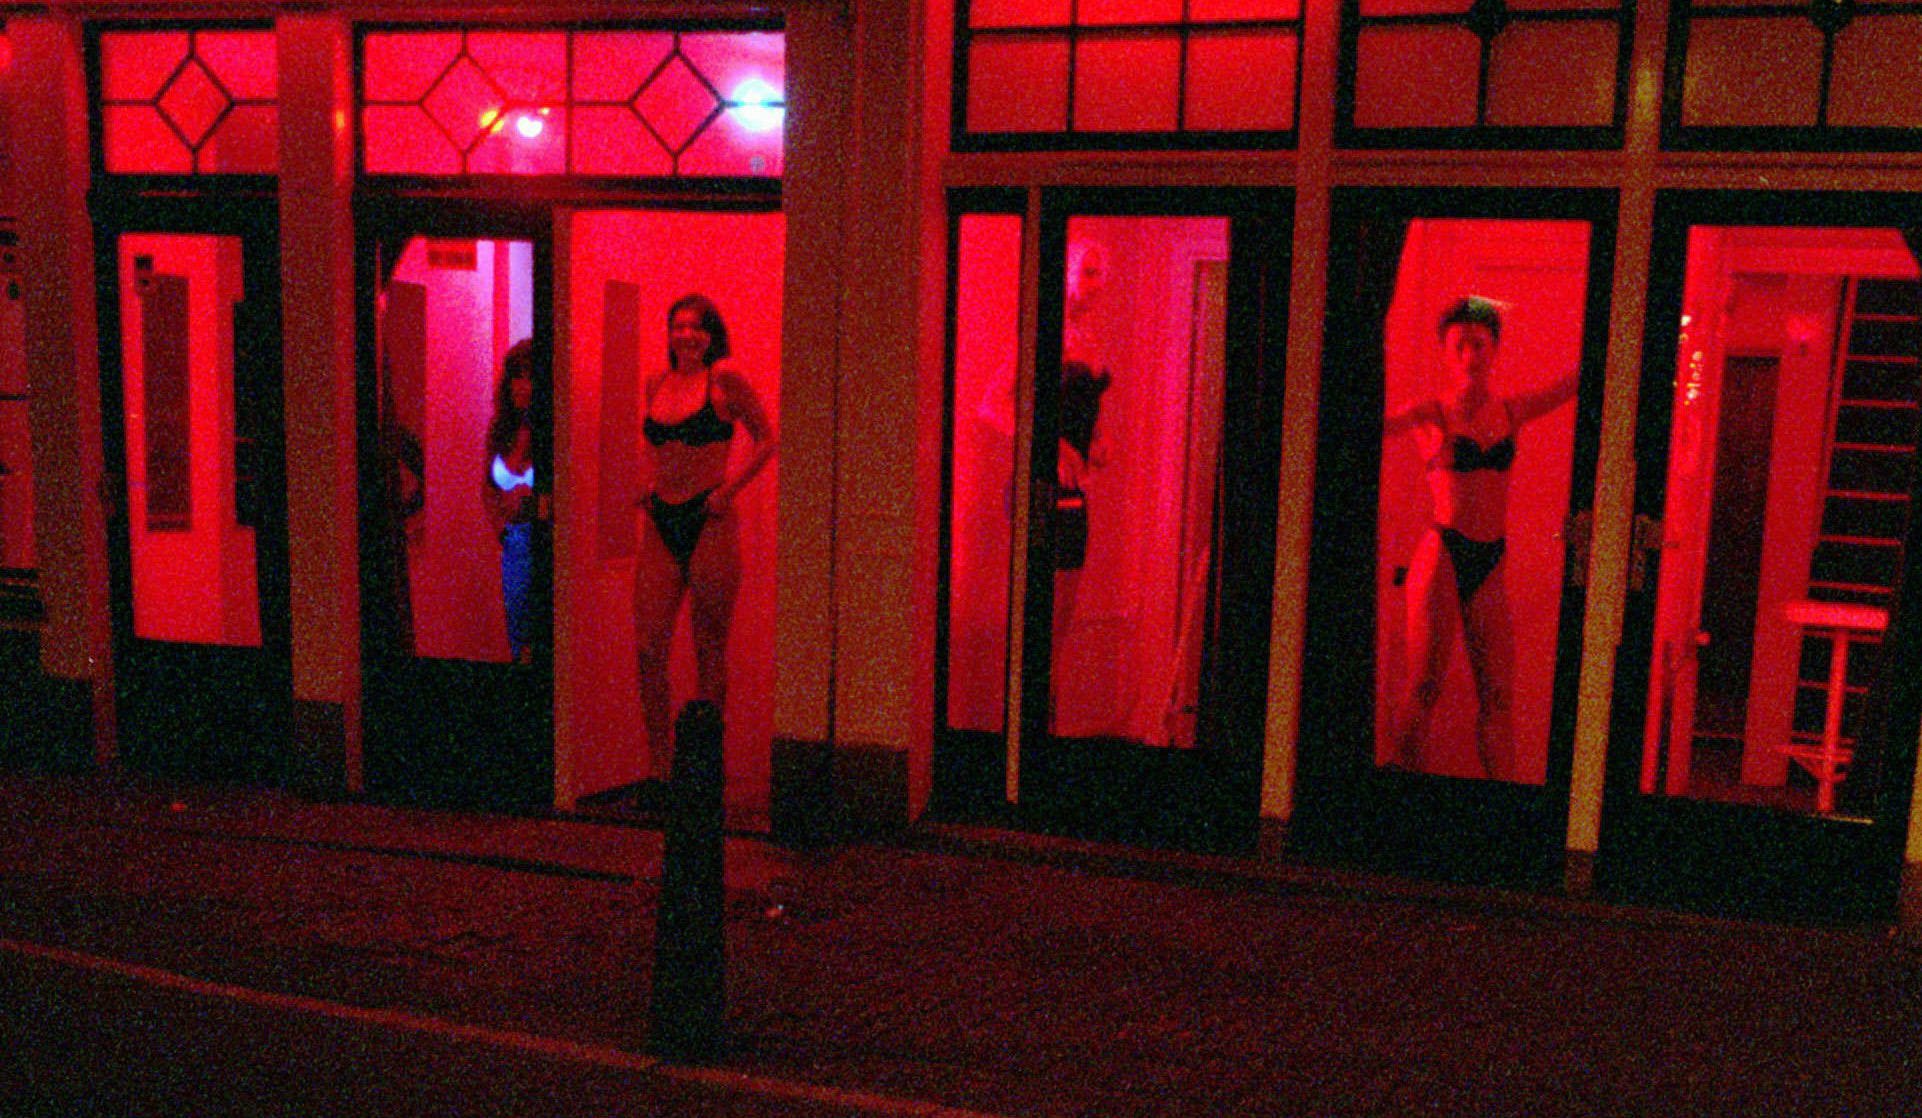 Prostitution in Amsterdam: The Dark Side of the Amsterdam Red Light District